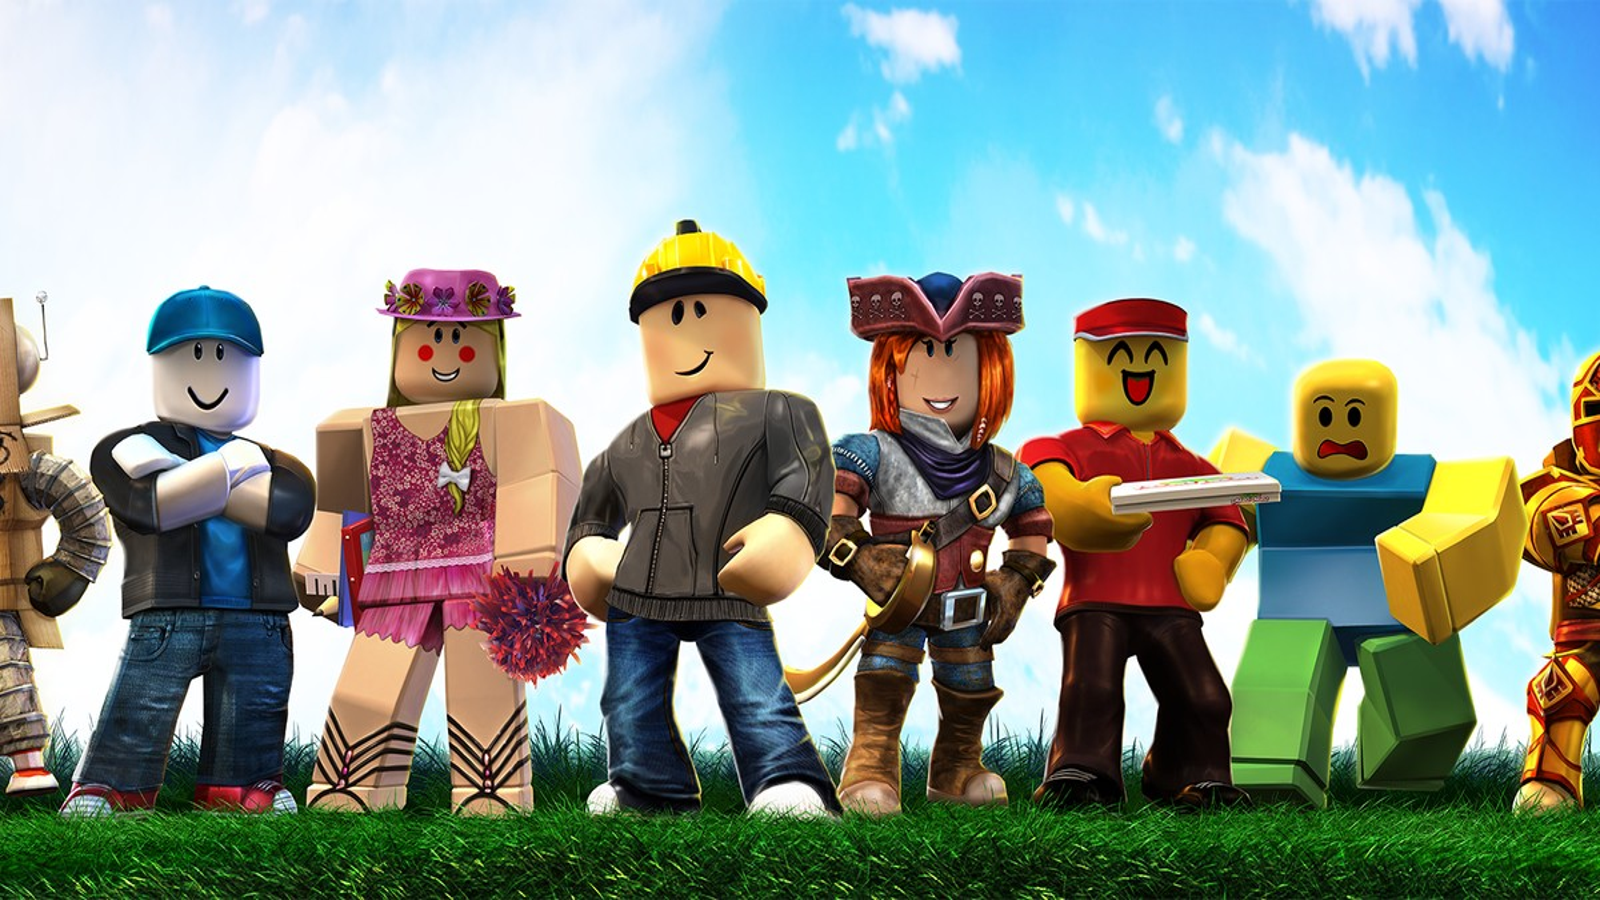 Leaked documents show Roblox agreement plans in China